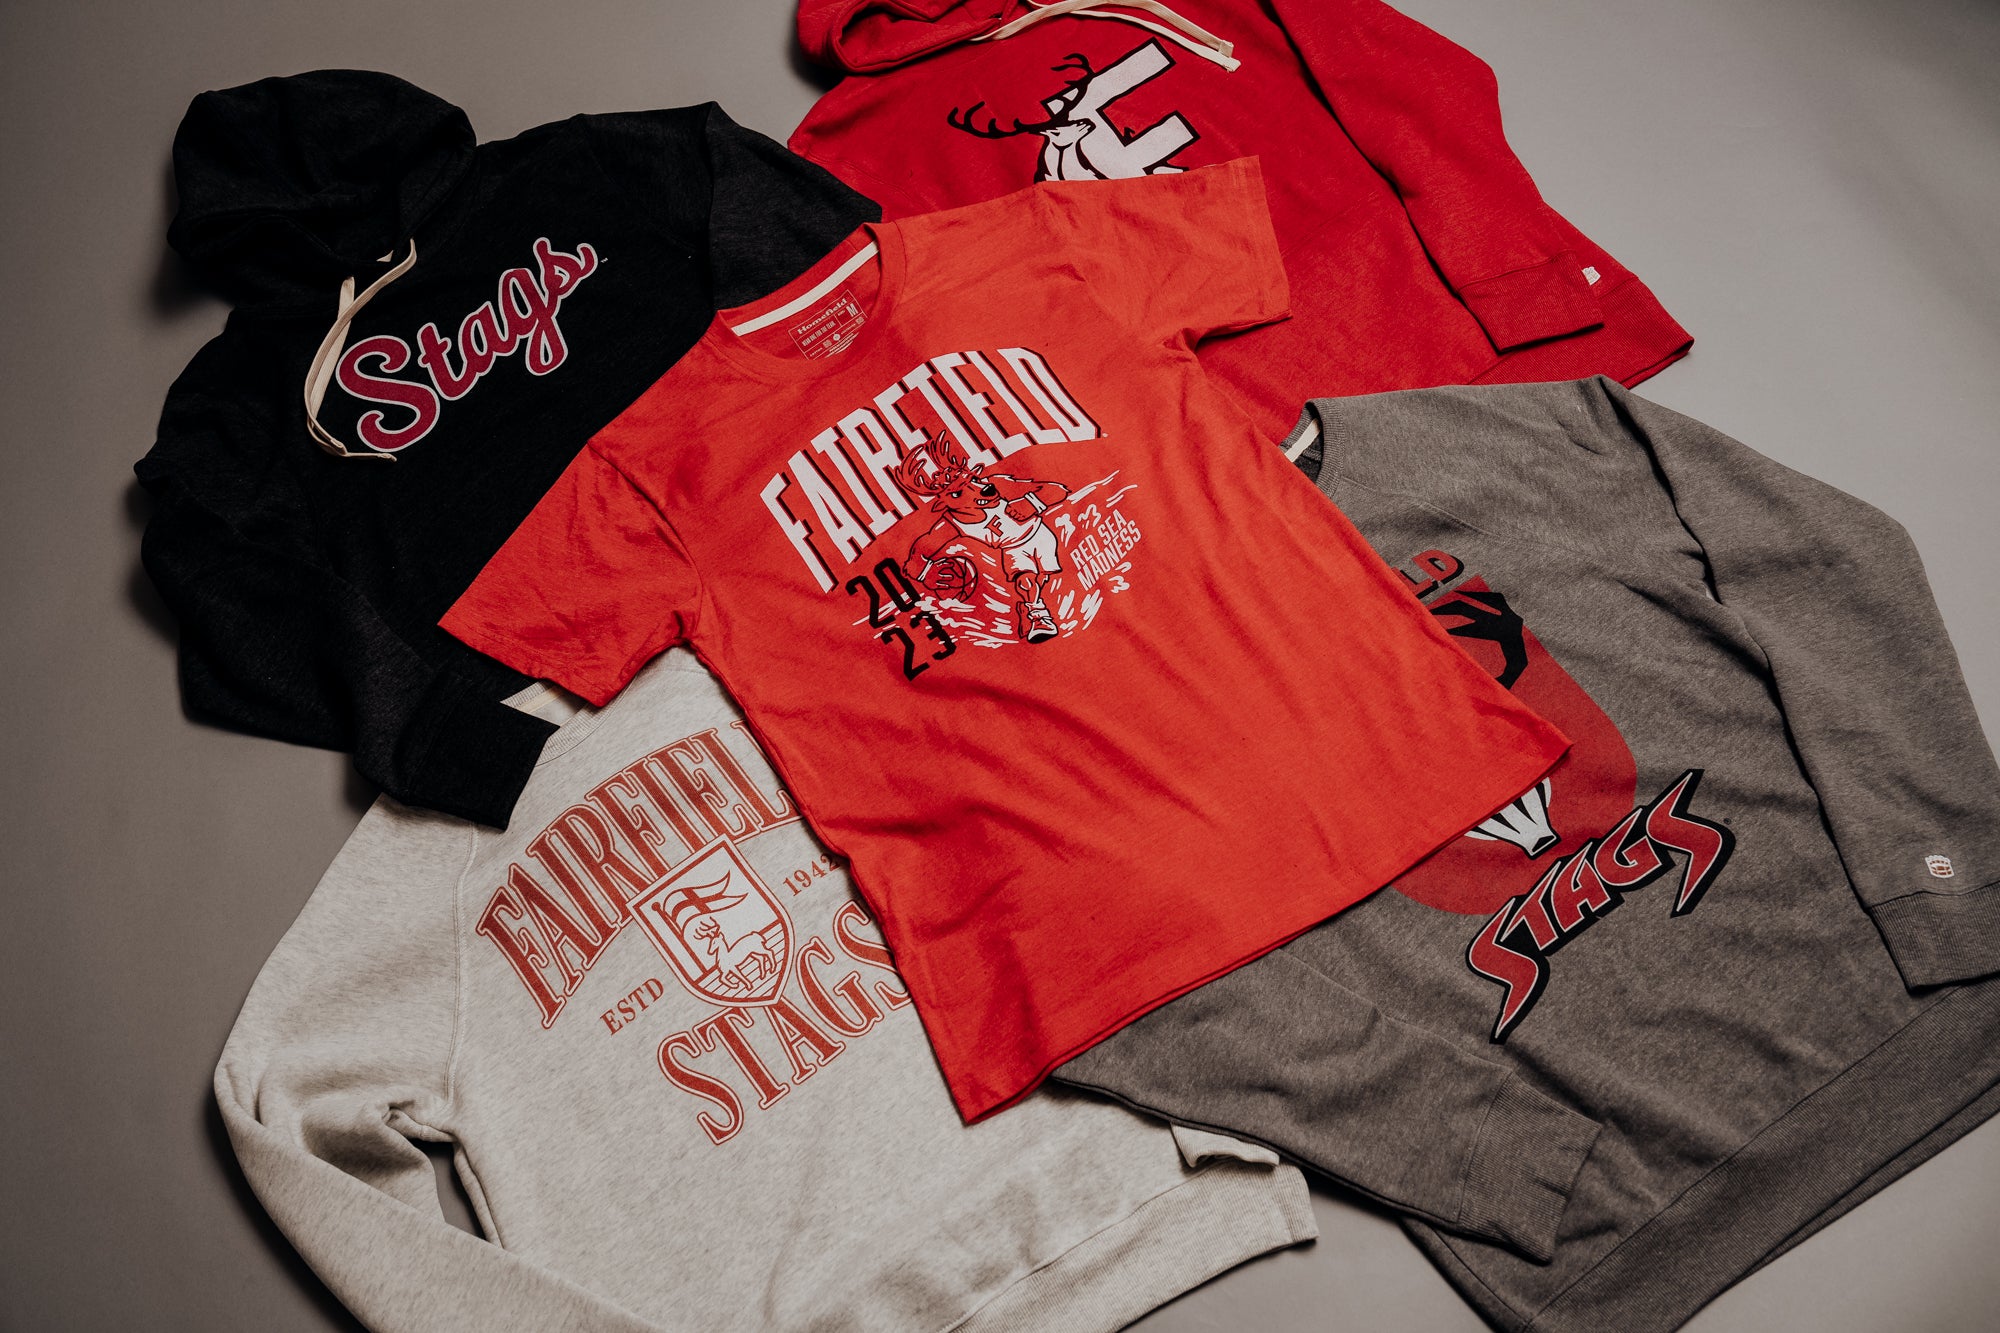 Vintage Fairfield Stags Apparel: Shirts and Sweatshirts | Homefield